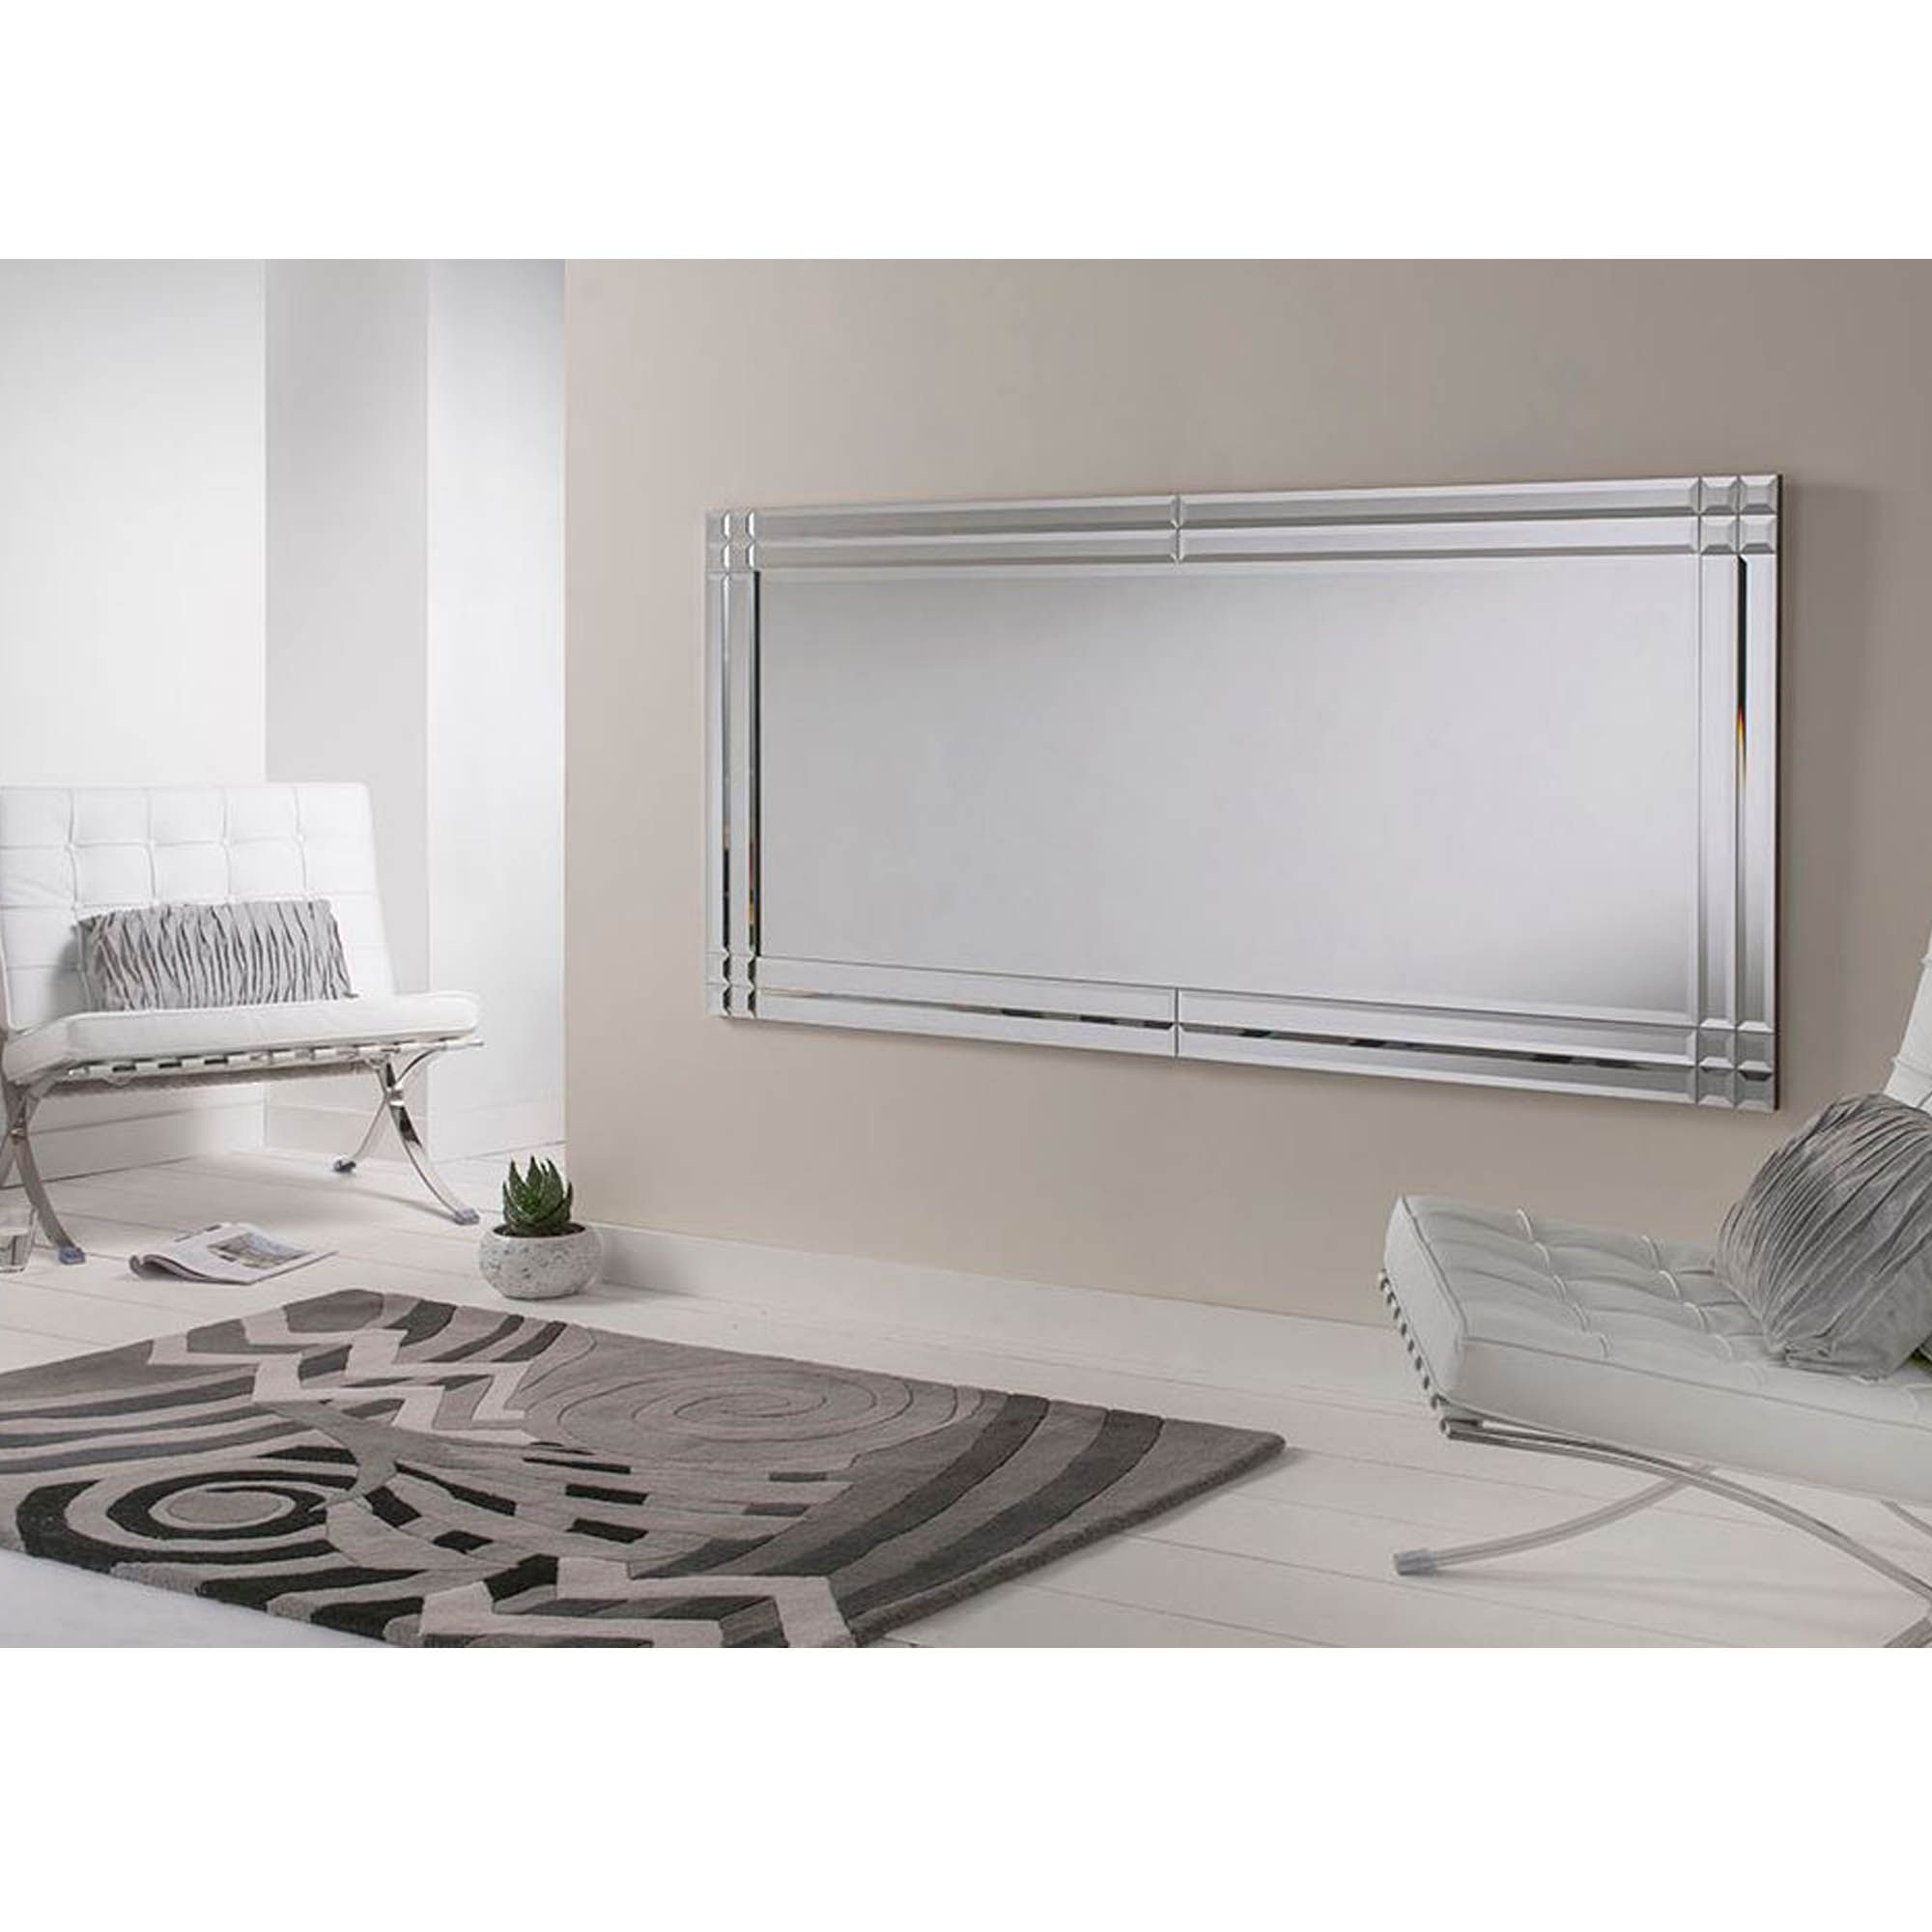 Fashionable Gorgeous Long Glass Wall Mirror Bevelled Silver Mirrored In Long Wall Mirrors For Bedroom (View 15 of 20)